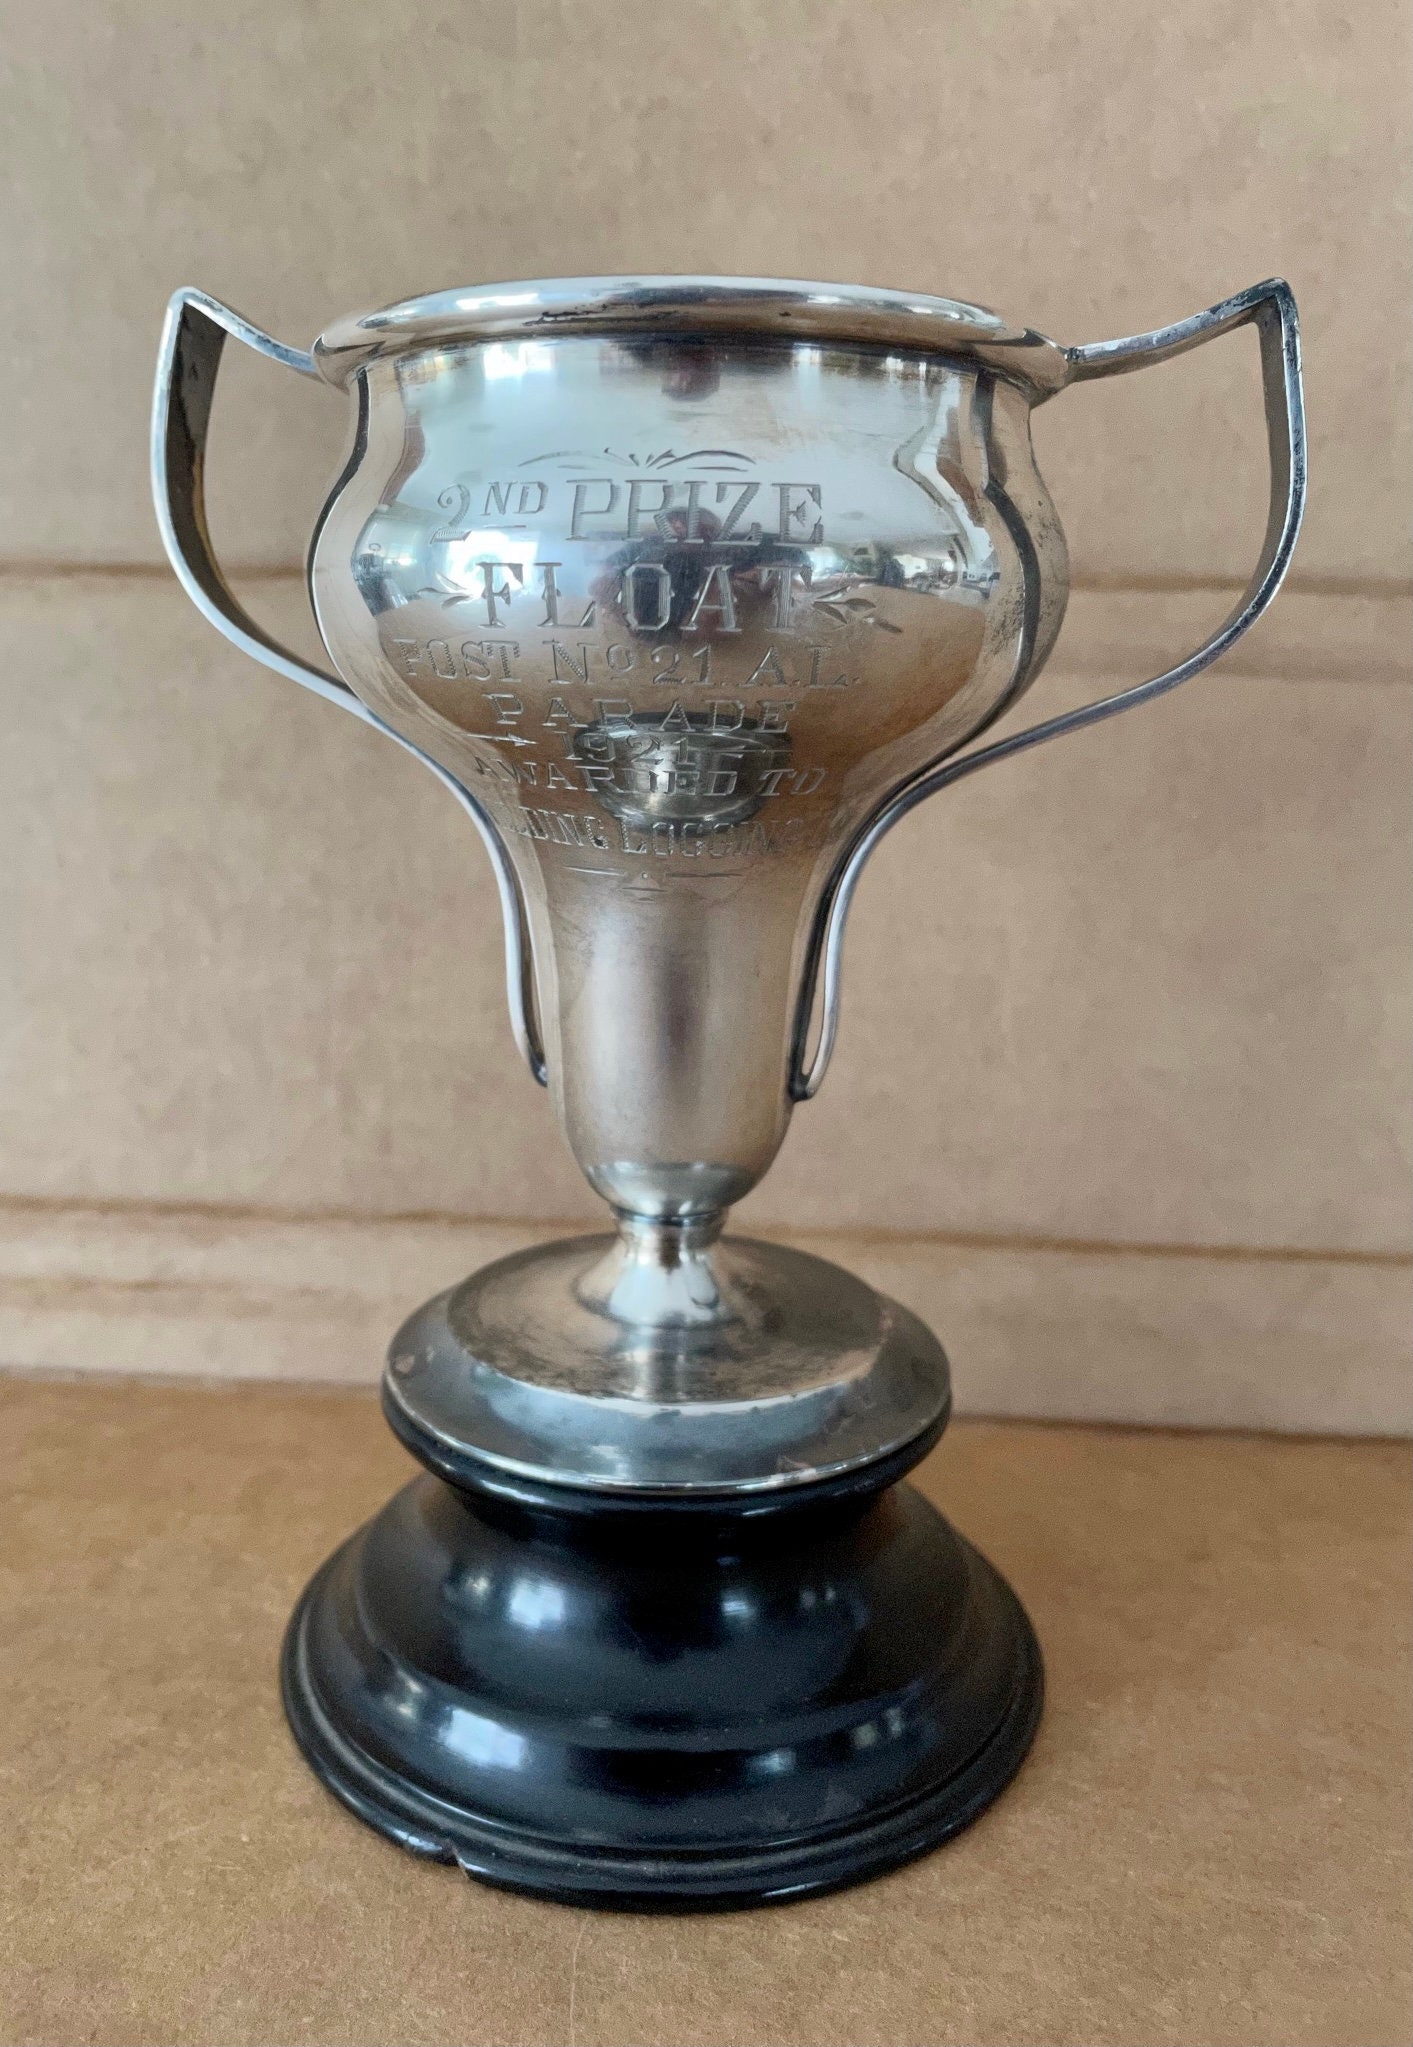 1921 Silver Loving Cup Trophy 2nd Place Parade Float Logging